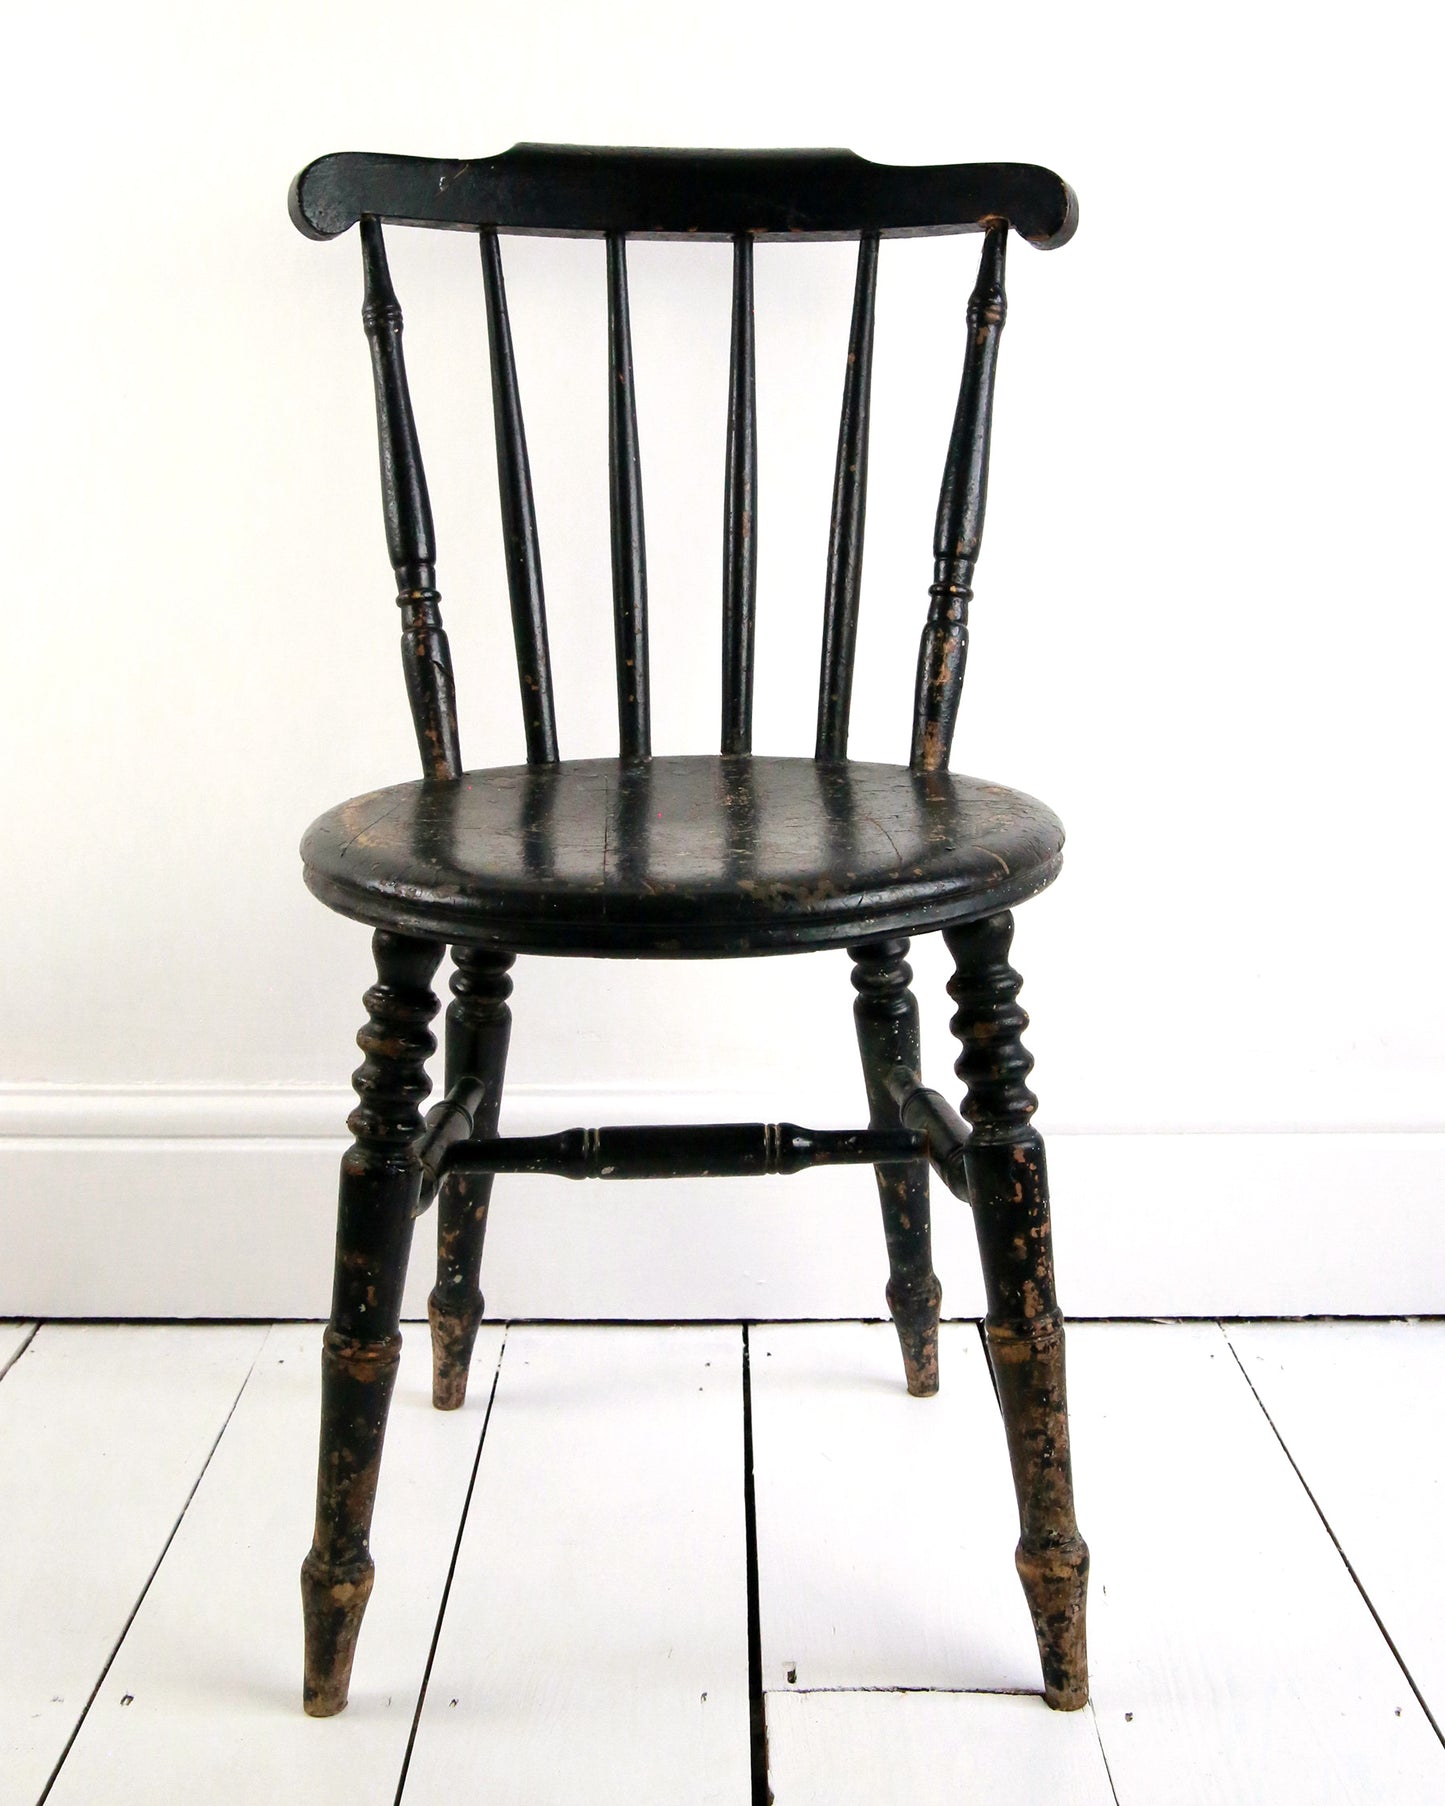 Original black penny seat spindle chair